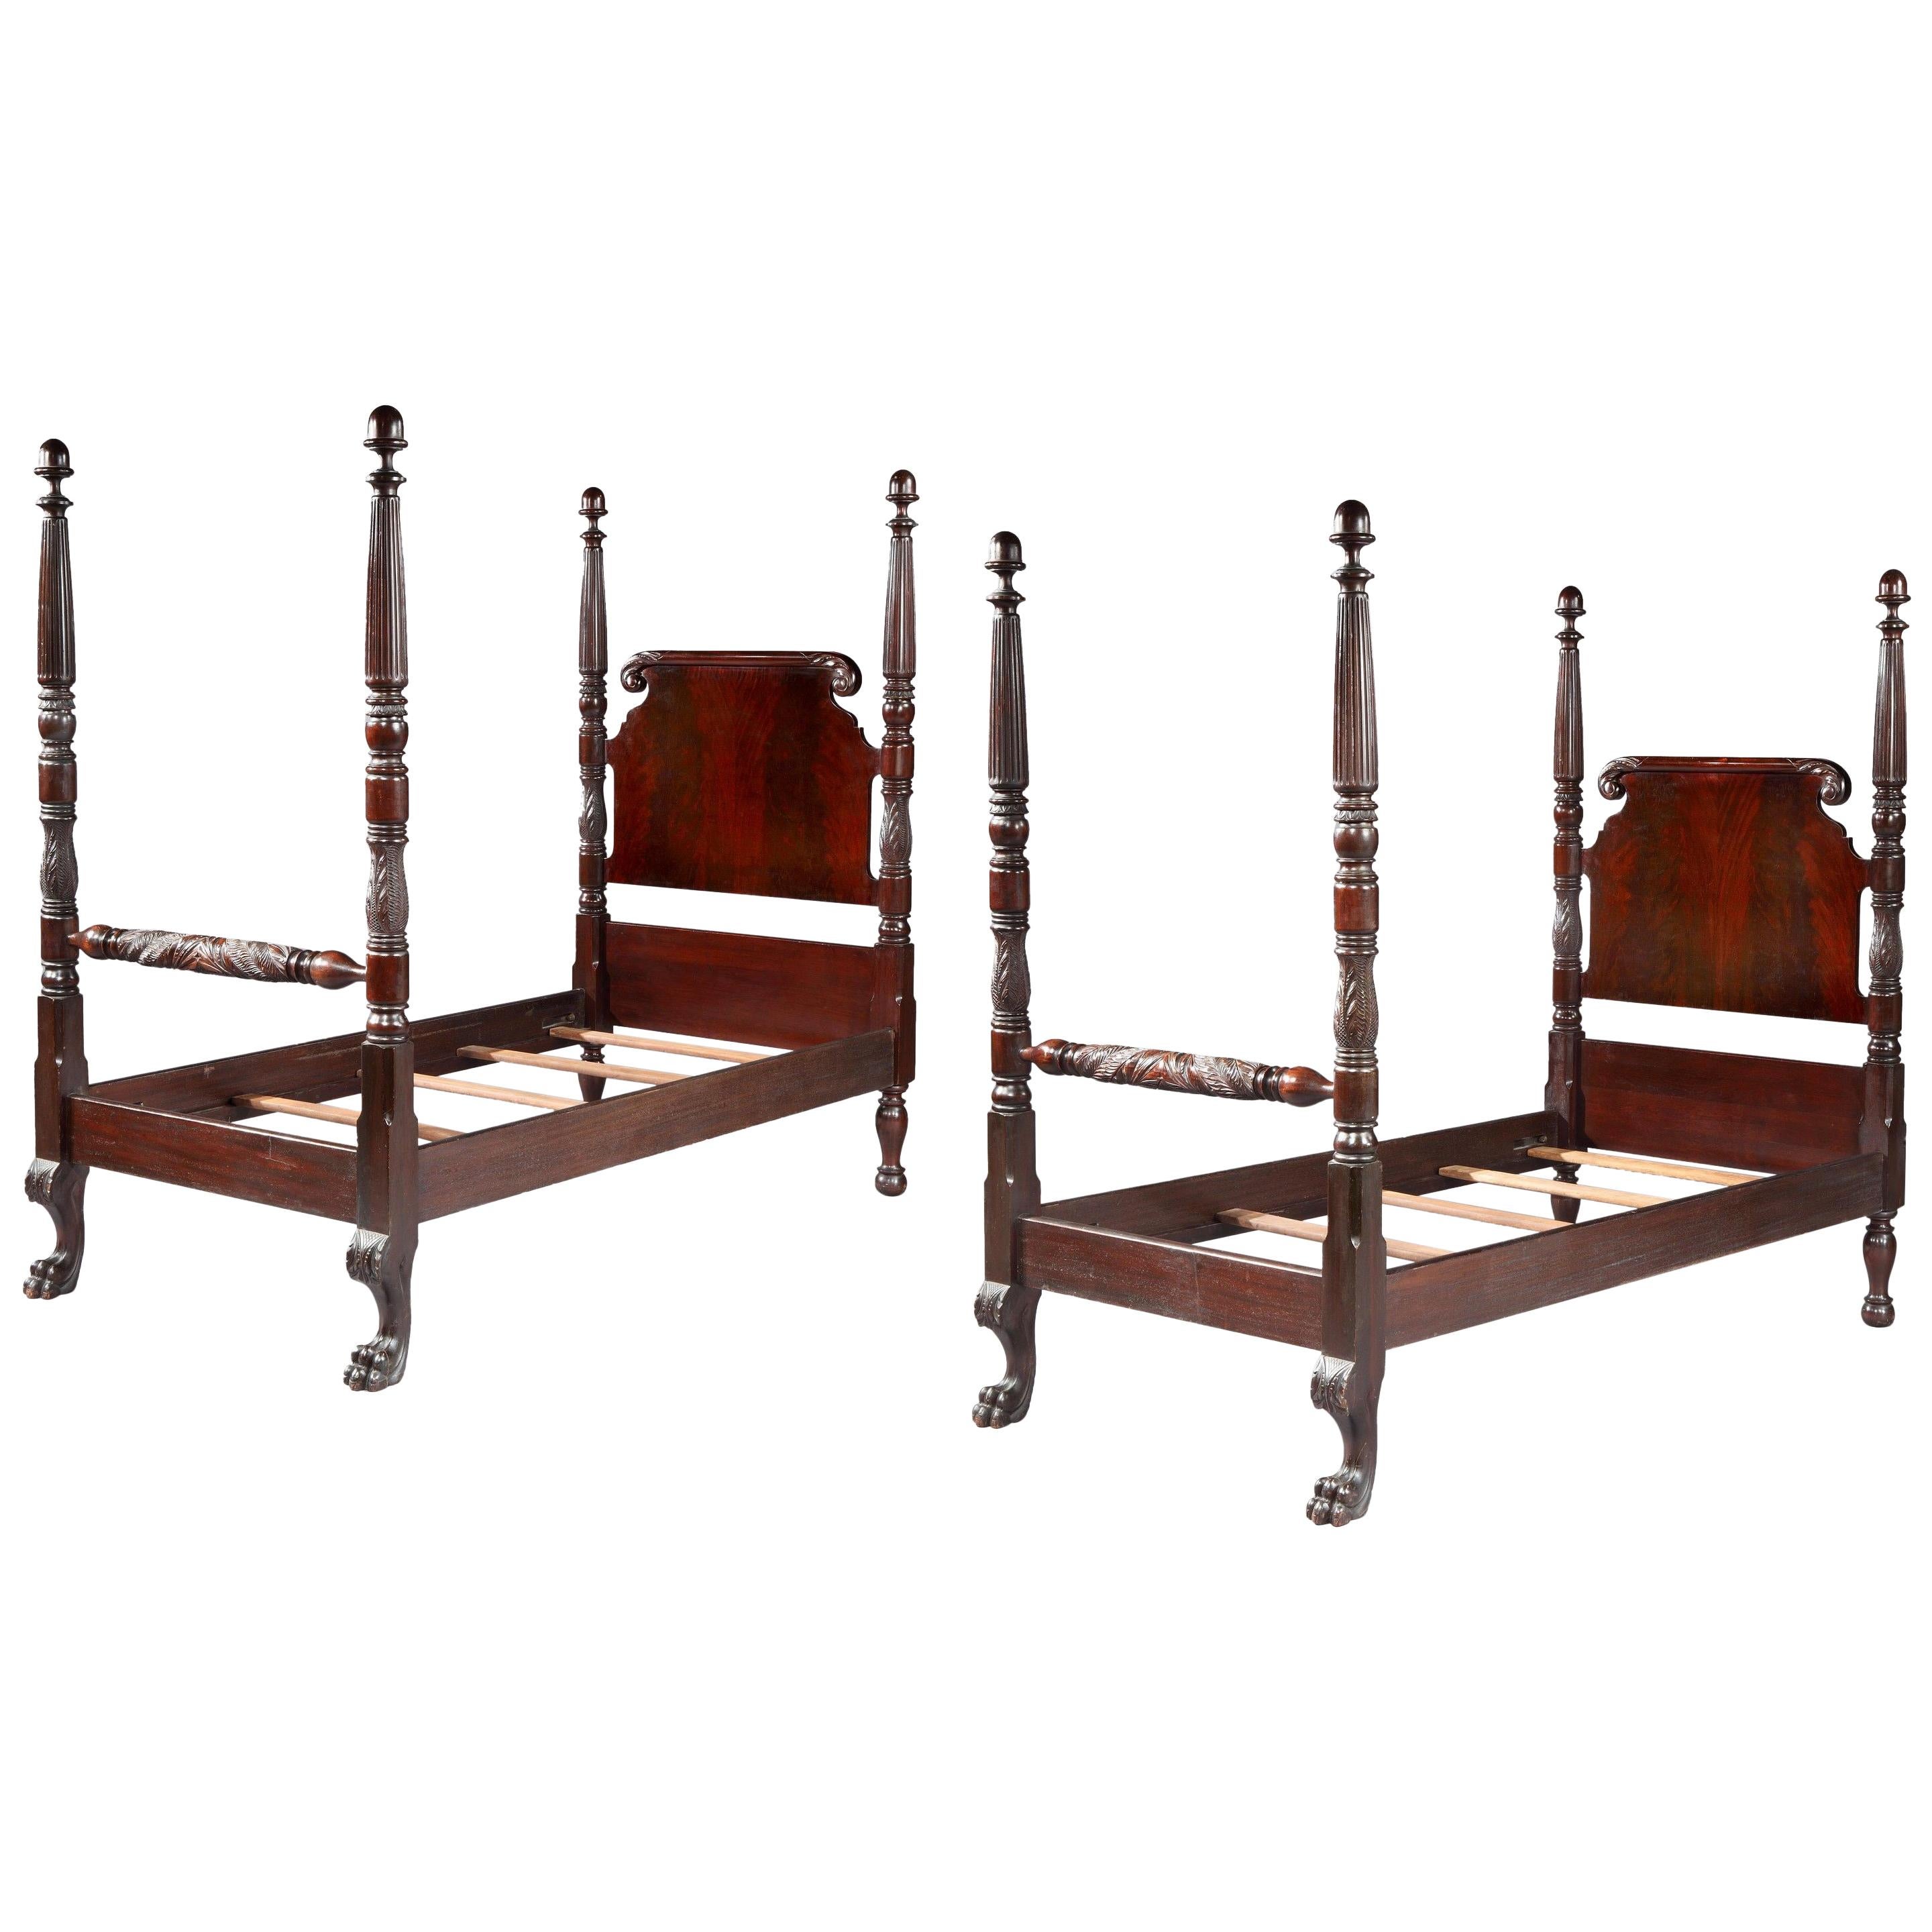 Pair of Beds, 19th Century, American Colonial-Style, Mahogany, ‘Antiquarian’